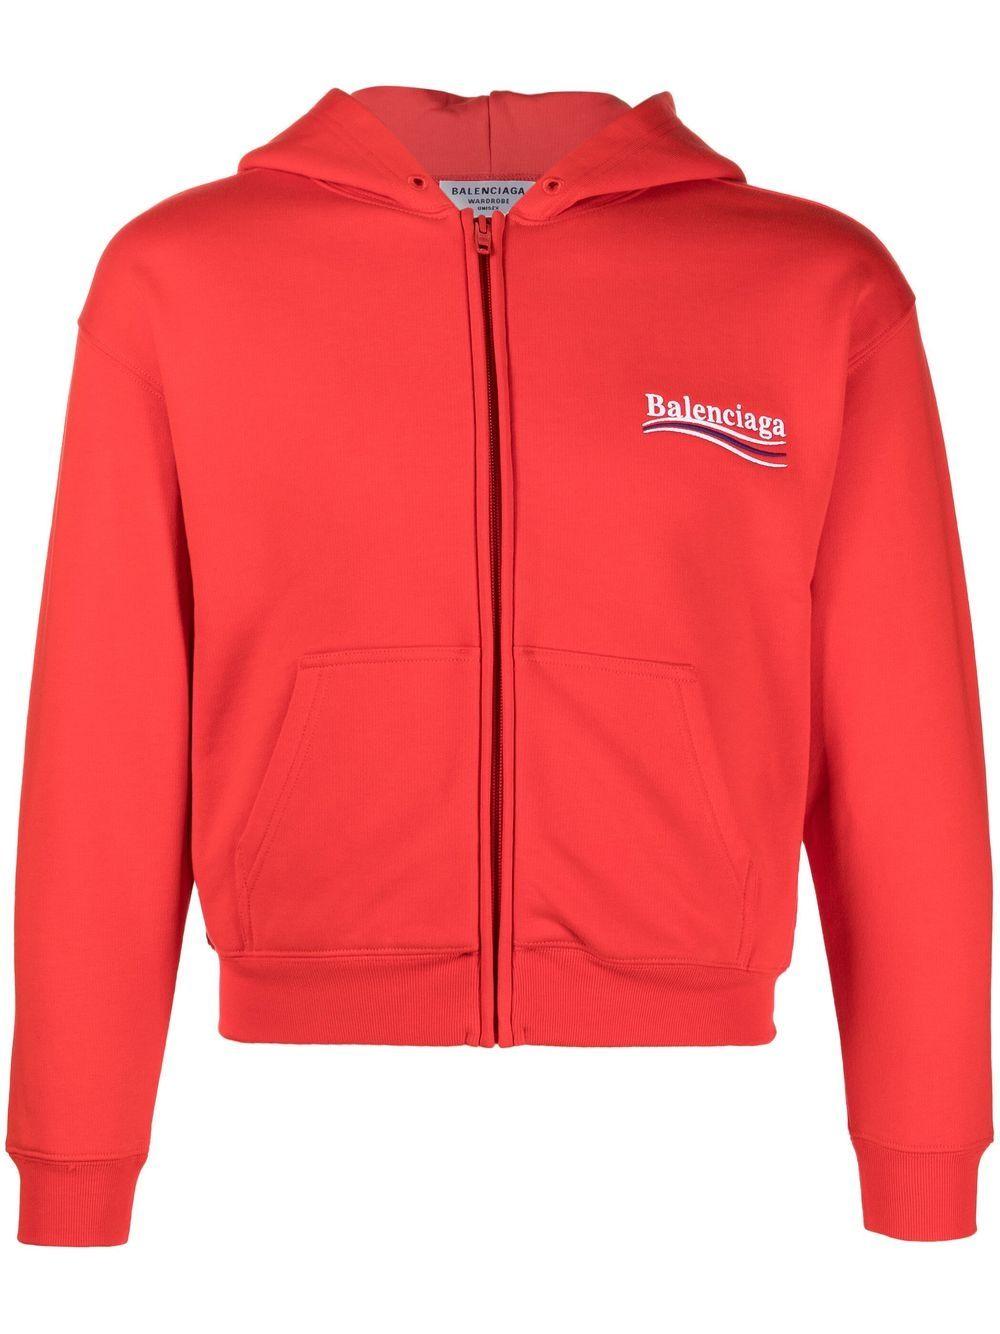 Balenciaga Political Campaign Fitted Zip-up Hoodie in Red | Lyst